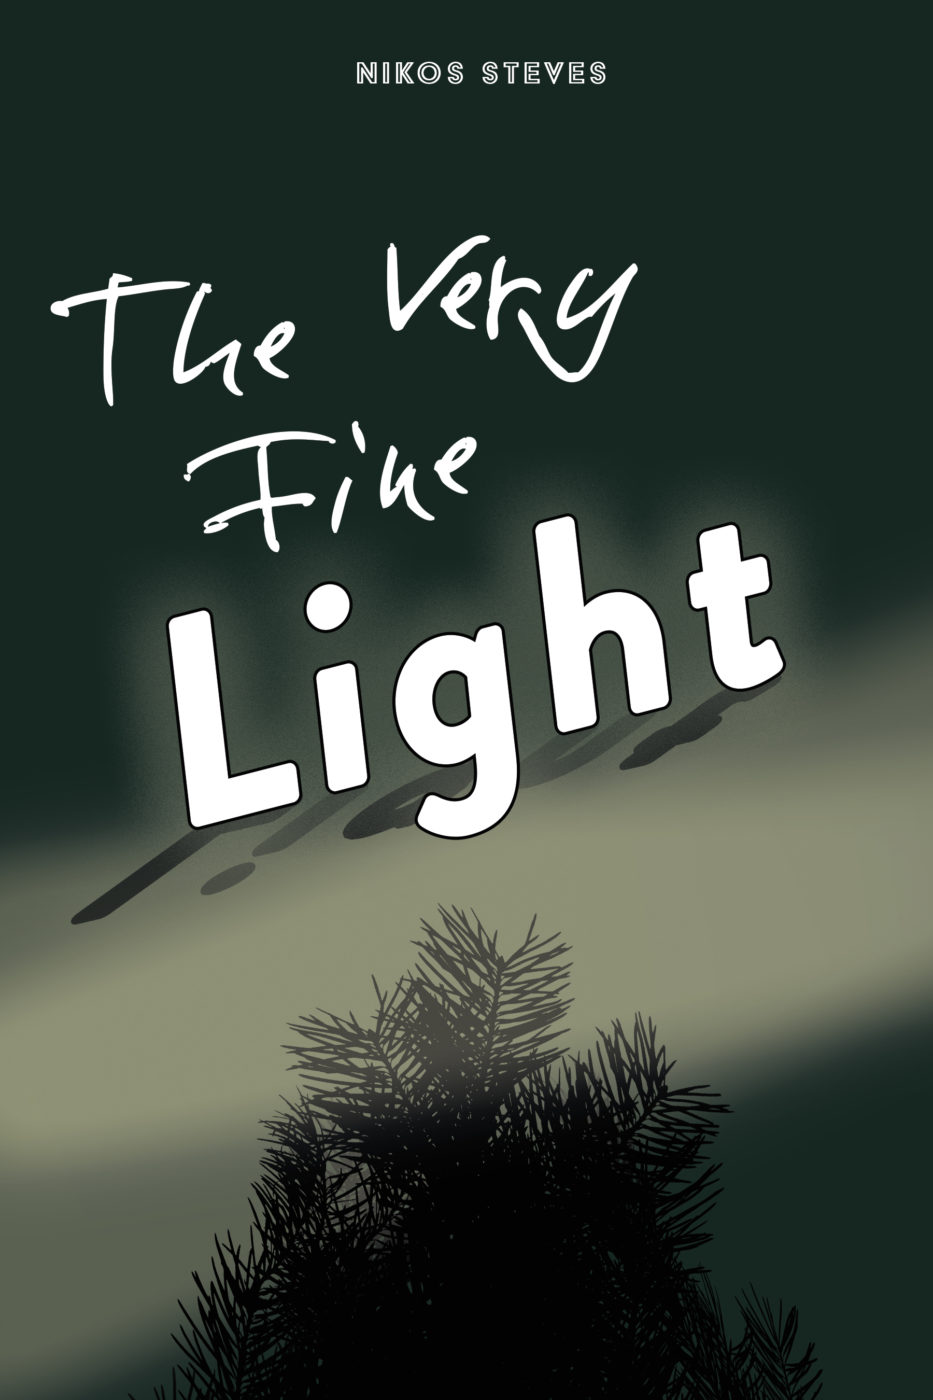 Cover Art for my book The Very Fine Light